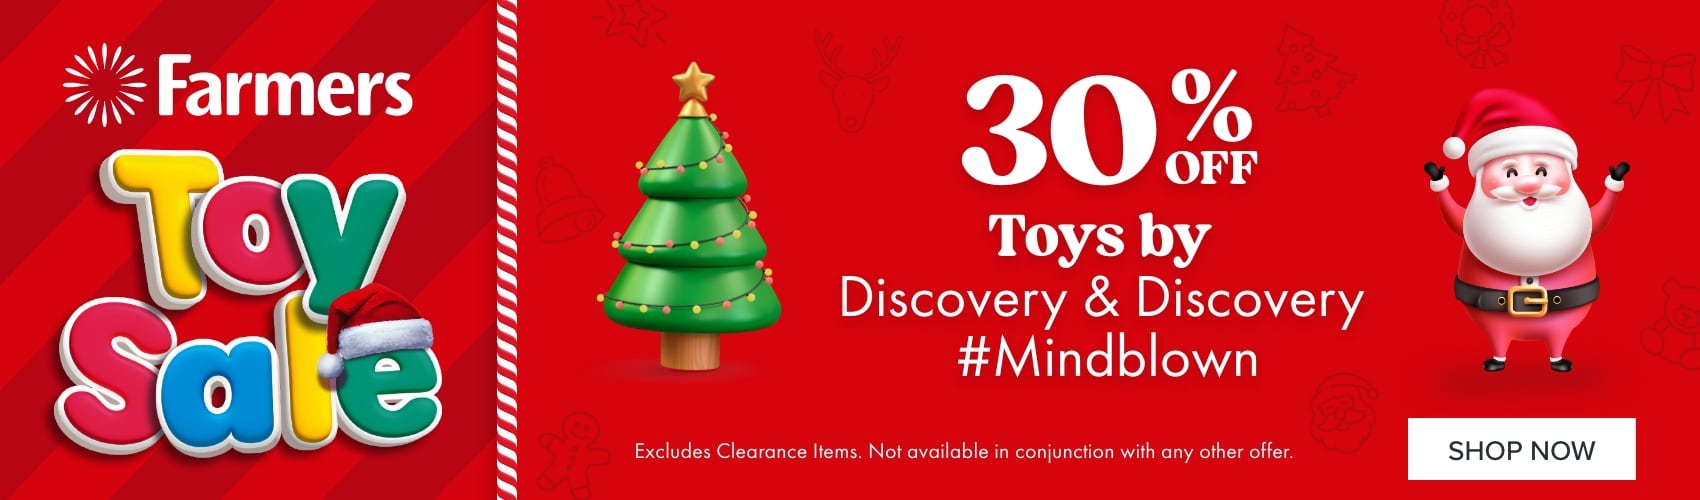 30% OFF Toys by Discovery & Discovery #Mindblown